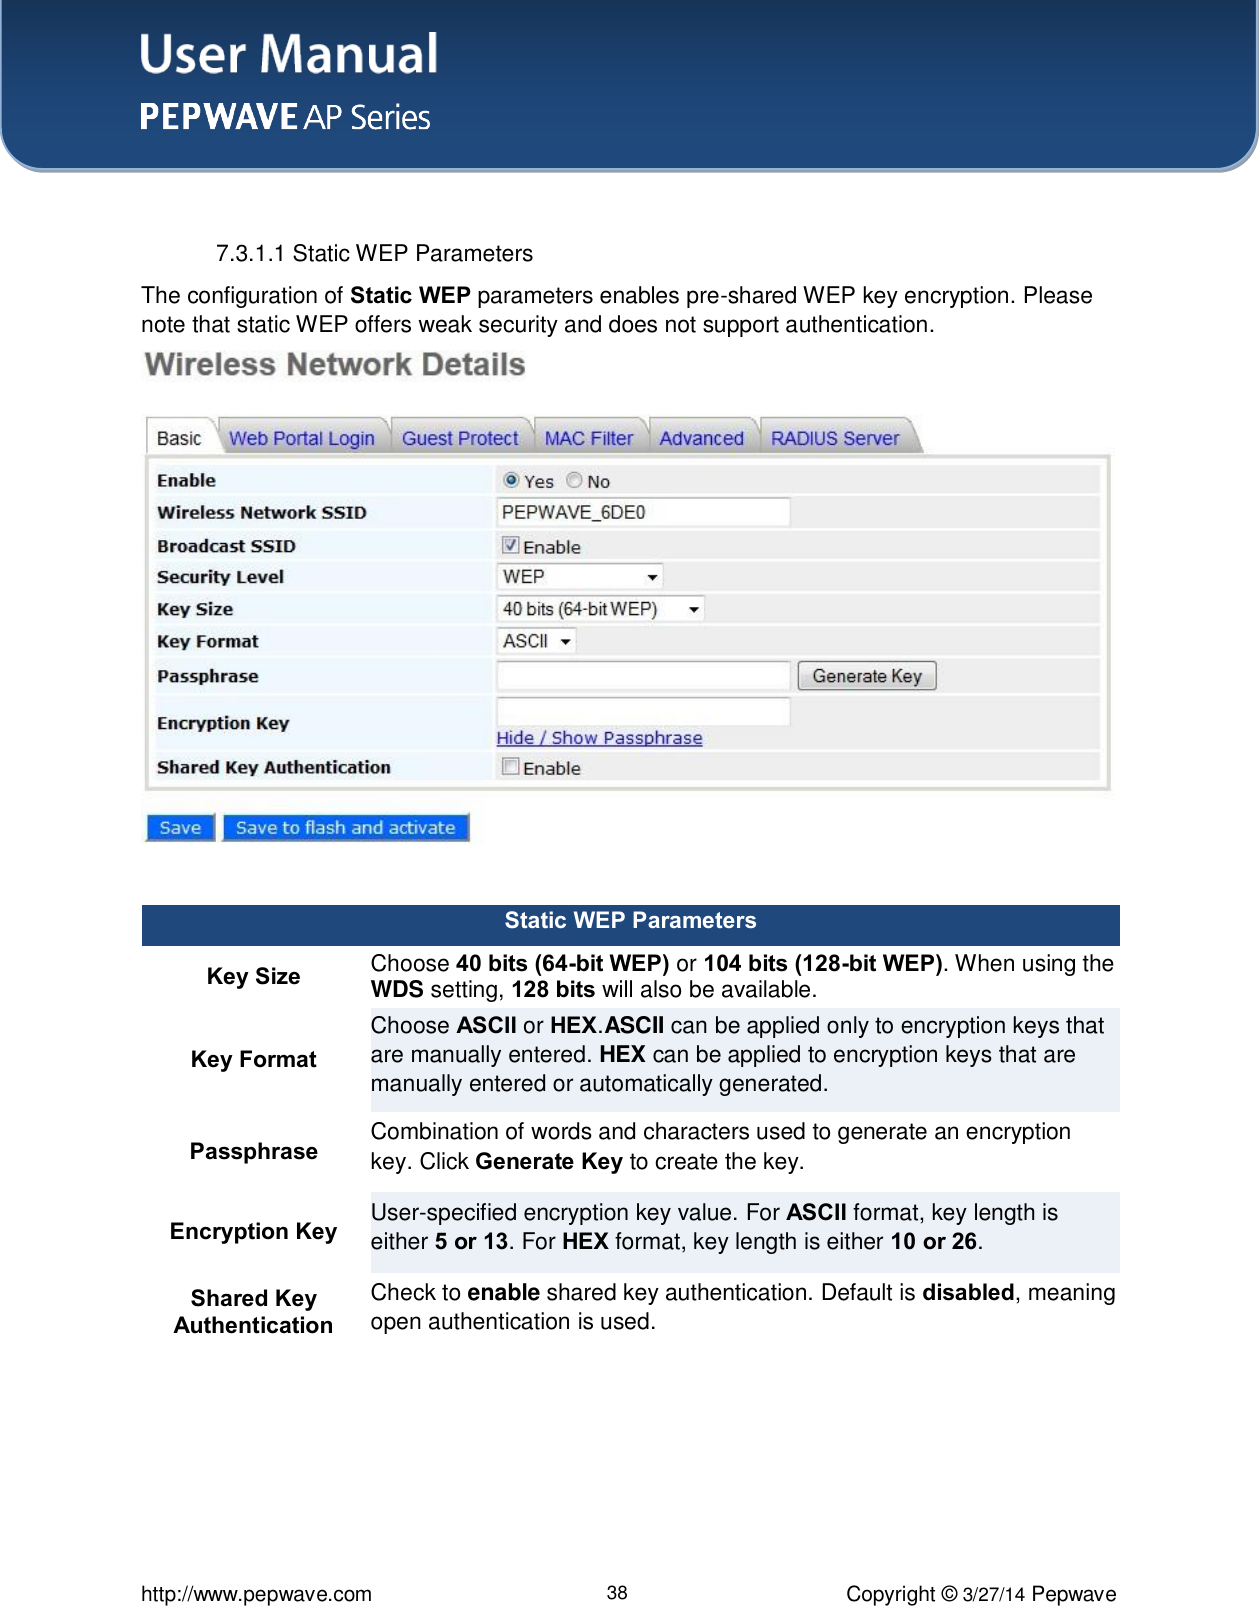 User Manual    http://www.pepwave.com 38 Copyright ©  3/27/14 Pepwave   7.3.1.1 Static WEP Parameters The configuration of Static WEP parameters enables pre-shared WEP key encryption. Please note that static WEP offers weak security and does not support authentication.   Static WEP Parameters Key Size Choose 40 bits (64-bit WEP) or 104 bits (128-bit WEP). When using the WDS setting, 128 bits will also be available. Key Format Choose ASCII or HEX.ASCII can be applied only to encryption keys that are manually entered. HEX can be applied to encryption keys that are manually entered or automatically generated. Passphrase Combination of words and characters used to generate an encryption key. Click Generate Key to create the key. Encryption Key User-specified encryption key value. For ASCII format, key length is either 5 or 13. For HEX format, key length is either 10 or 26. Shared Key Authentication Check to enable shared key authentication. Default is disabled, meaning open authentication is used.   